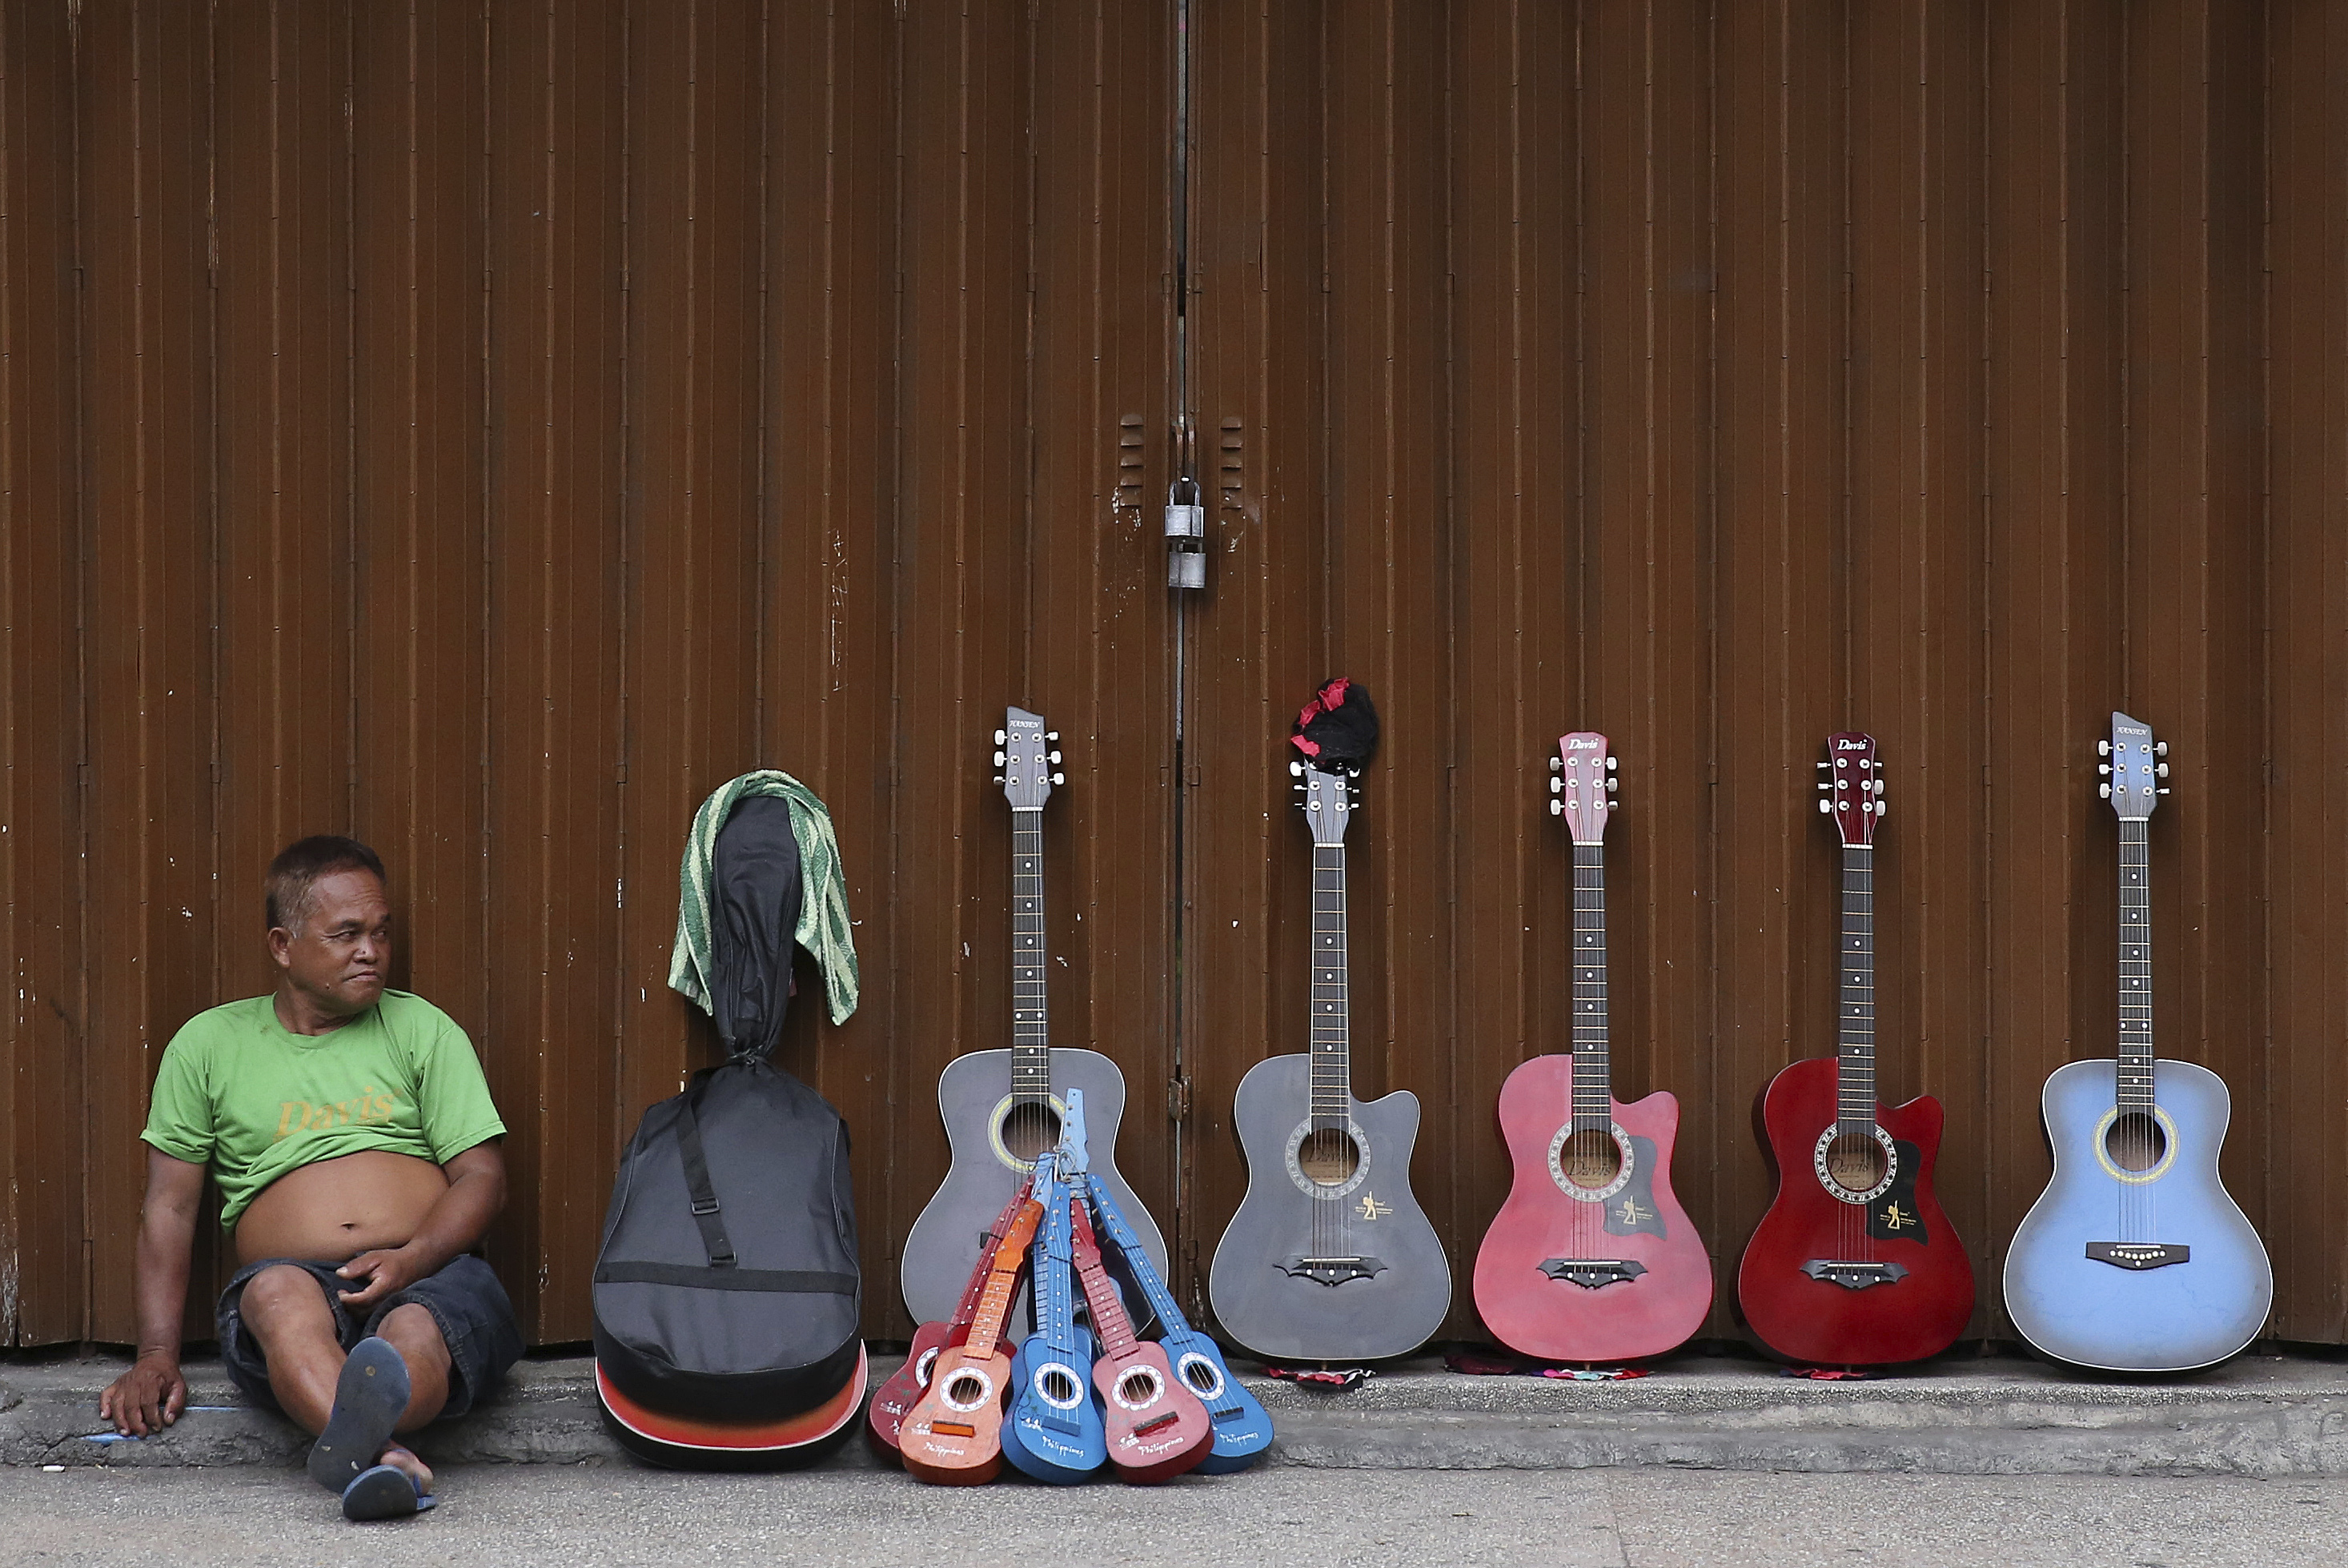 A guitar vendor Michael Hiyas, 57,  waits for customers along a street in Manila, Philippines on Thursday, May 18, 2017. Hiyas says his guitars are often bought by tourists and he earns about P400 (about US$8) a day. (AP Photo/Aaron Favila)